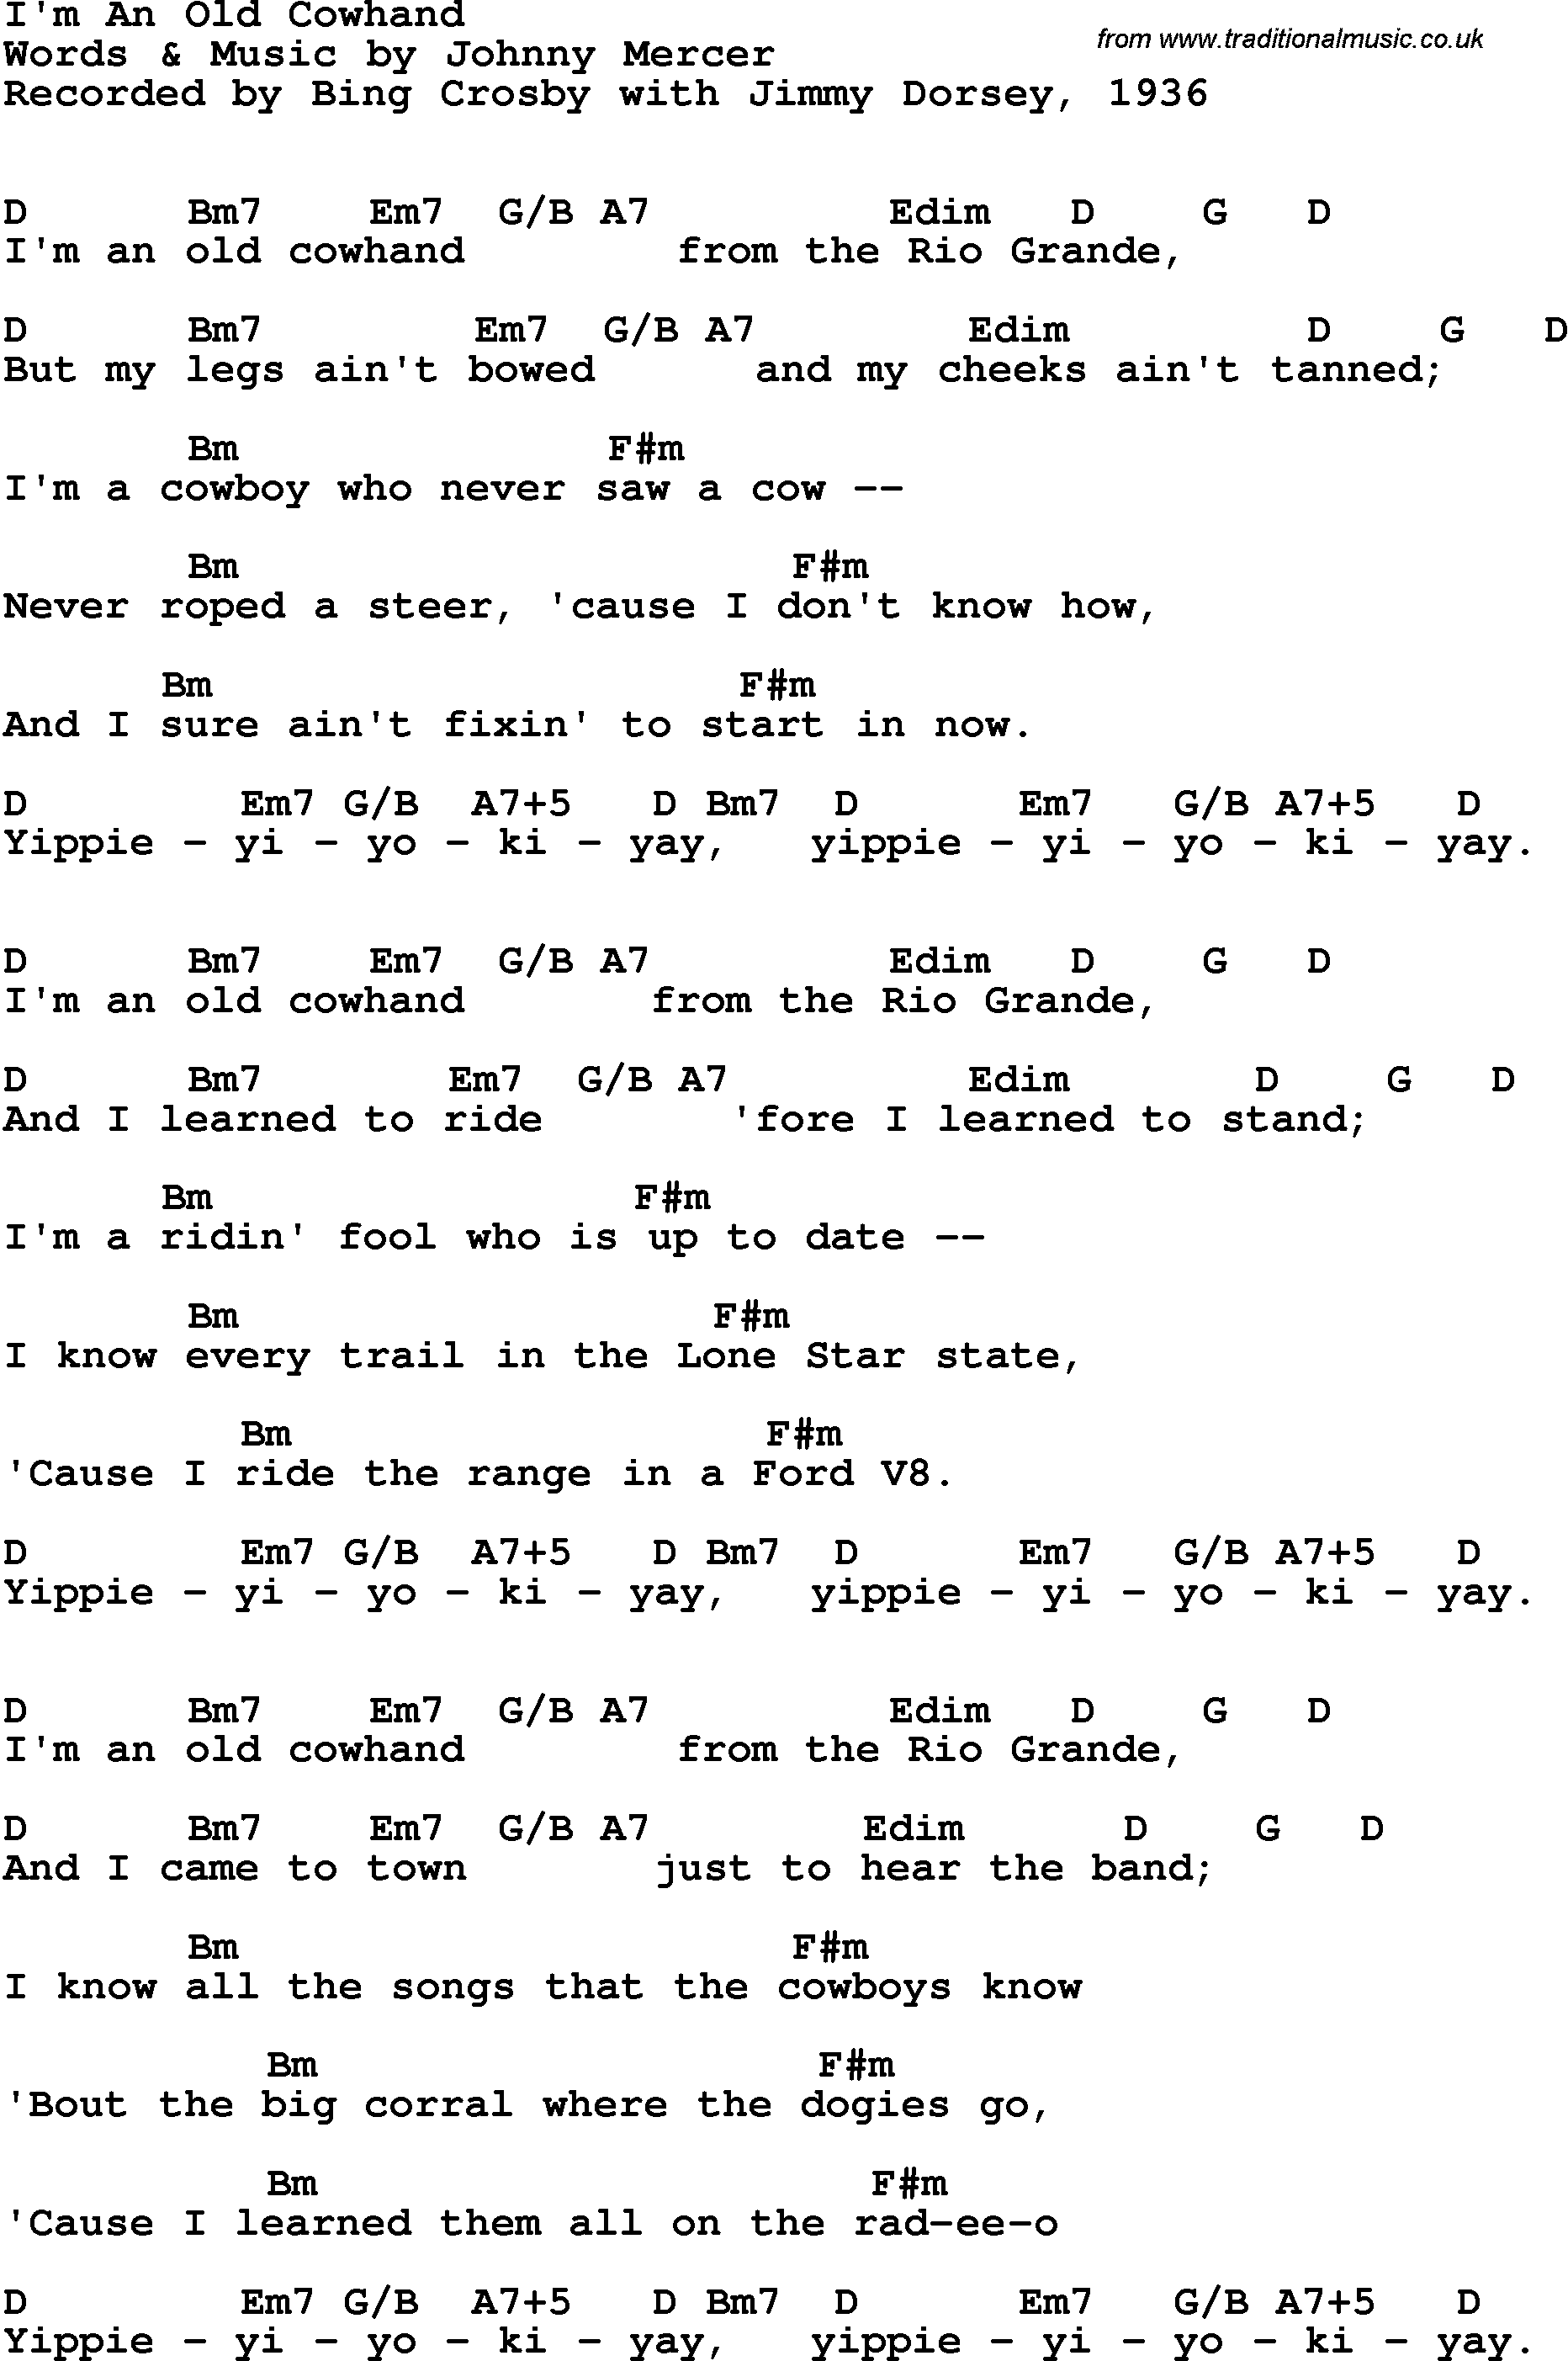 Song Lyrics with guitar chords for I'm An Old Cowhand - Bing Crosby, 1936